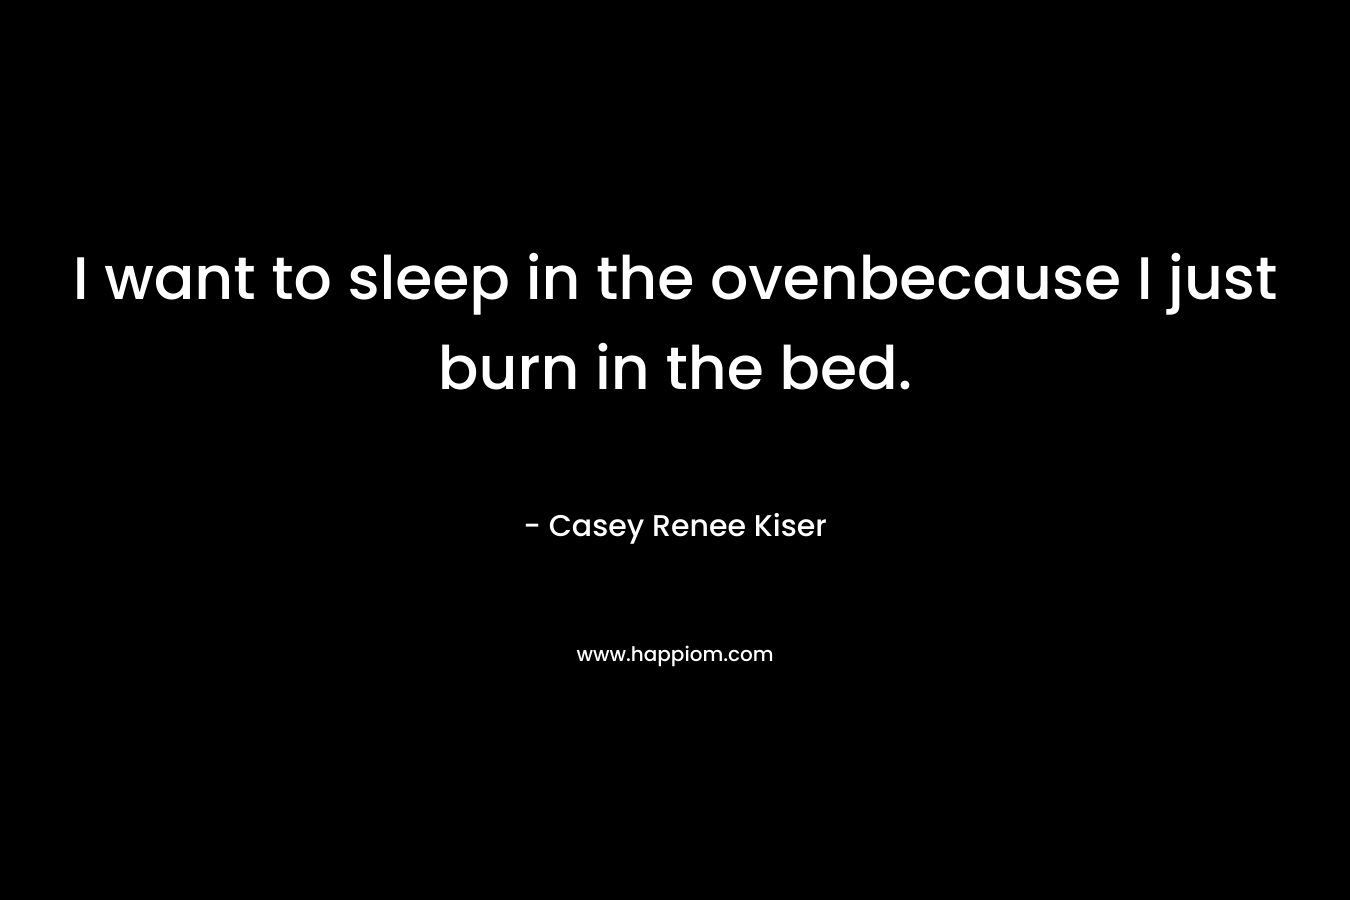 I want to sleep in the ovenbecause I just burn in the bed.